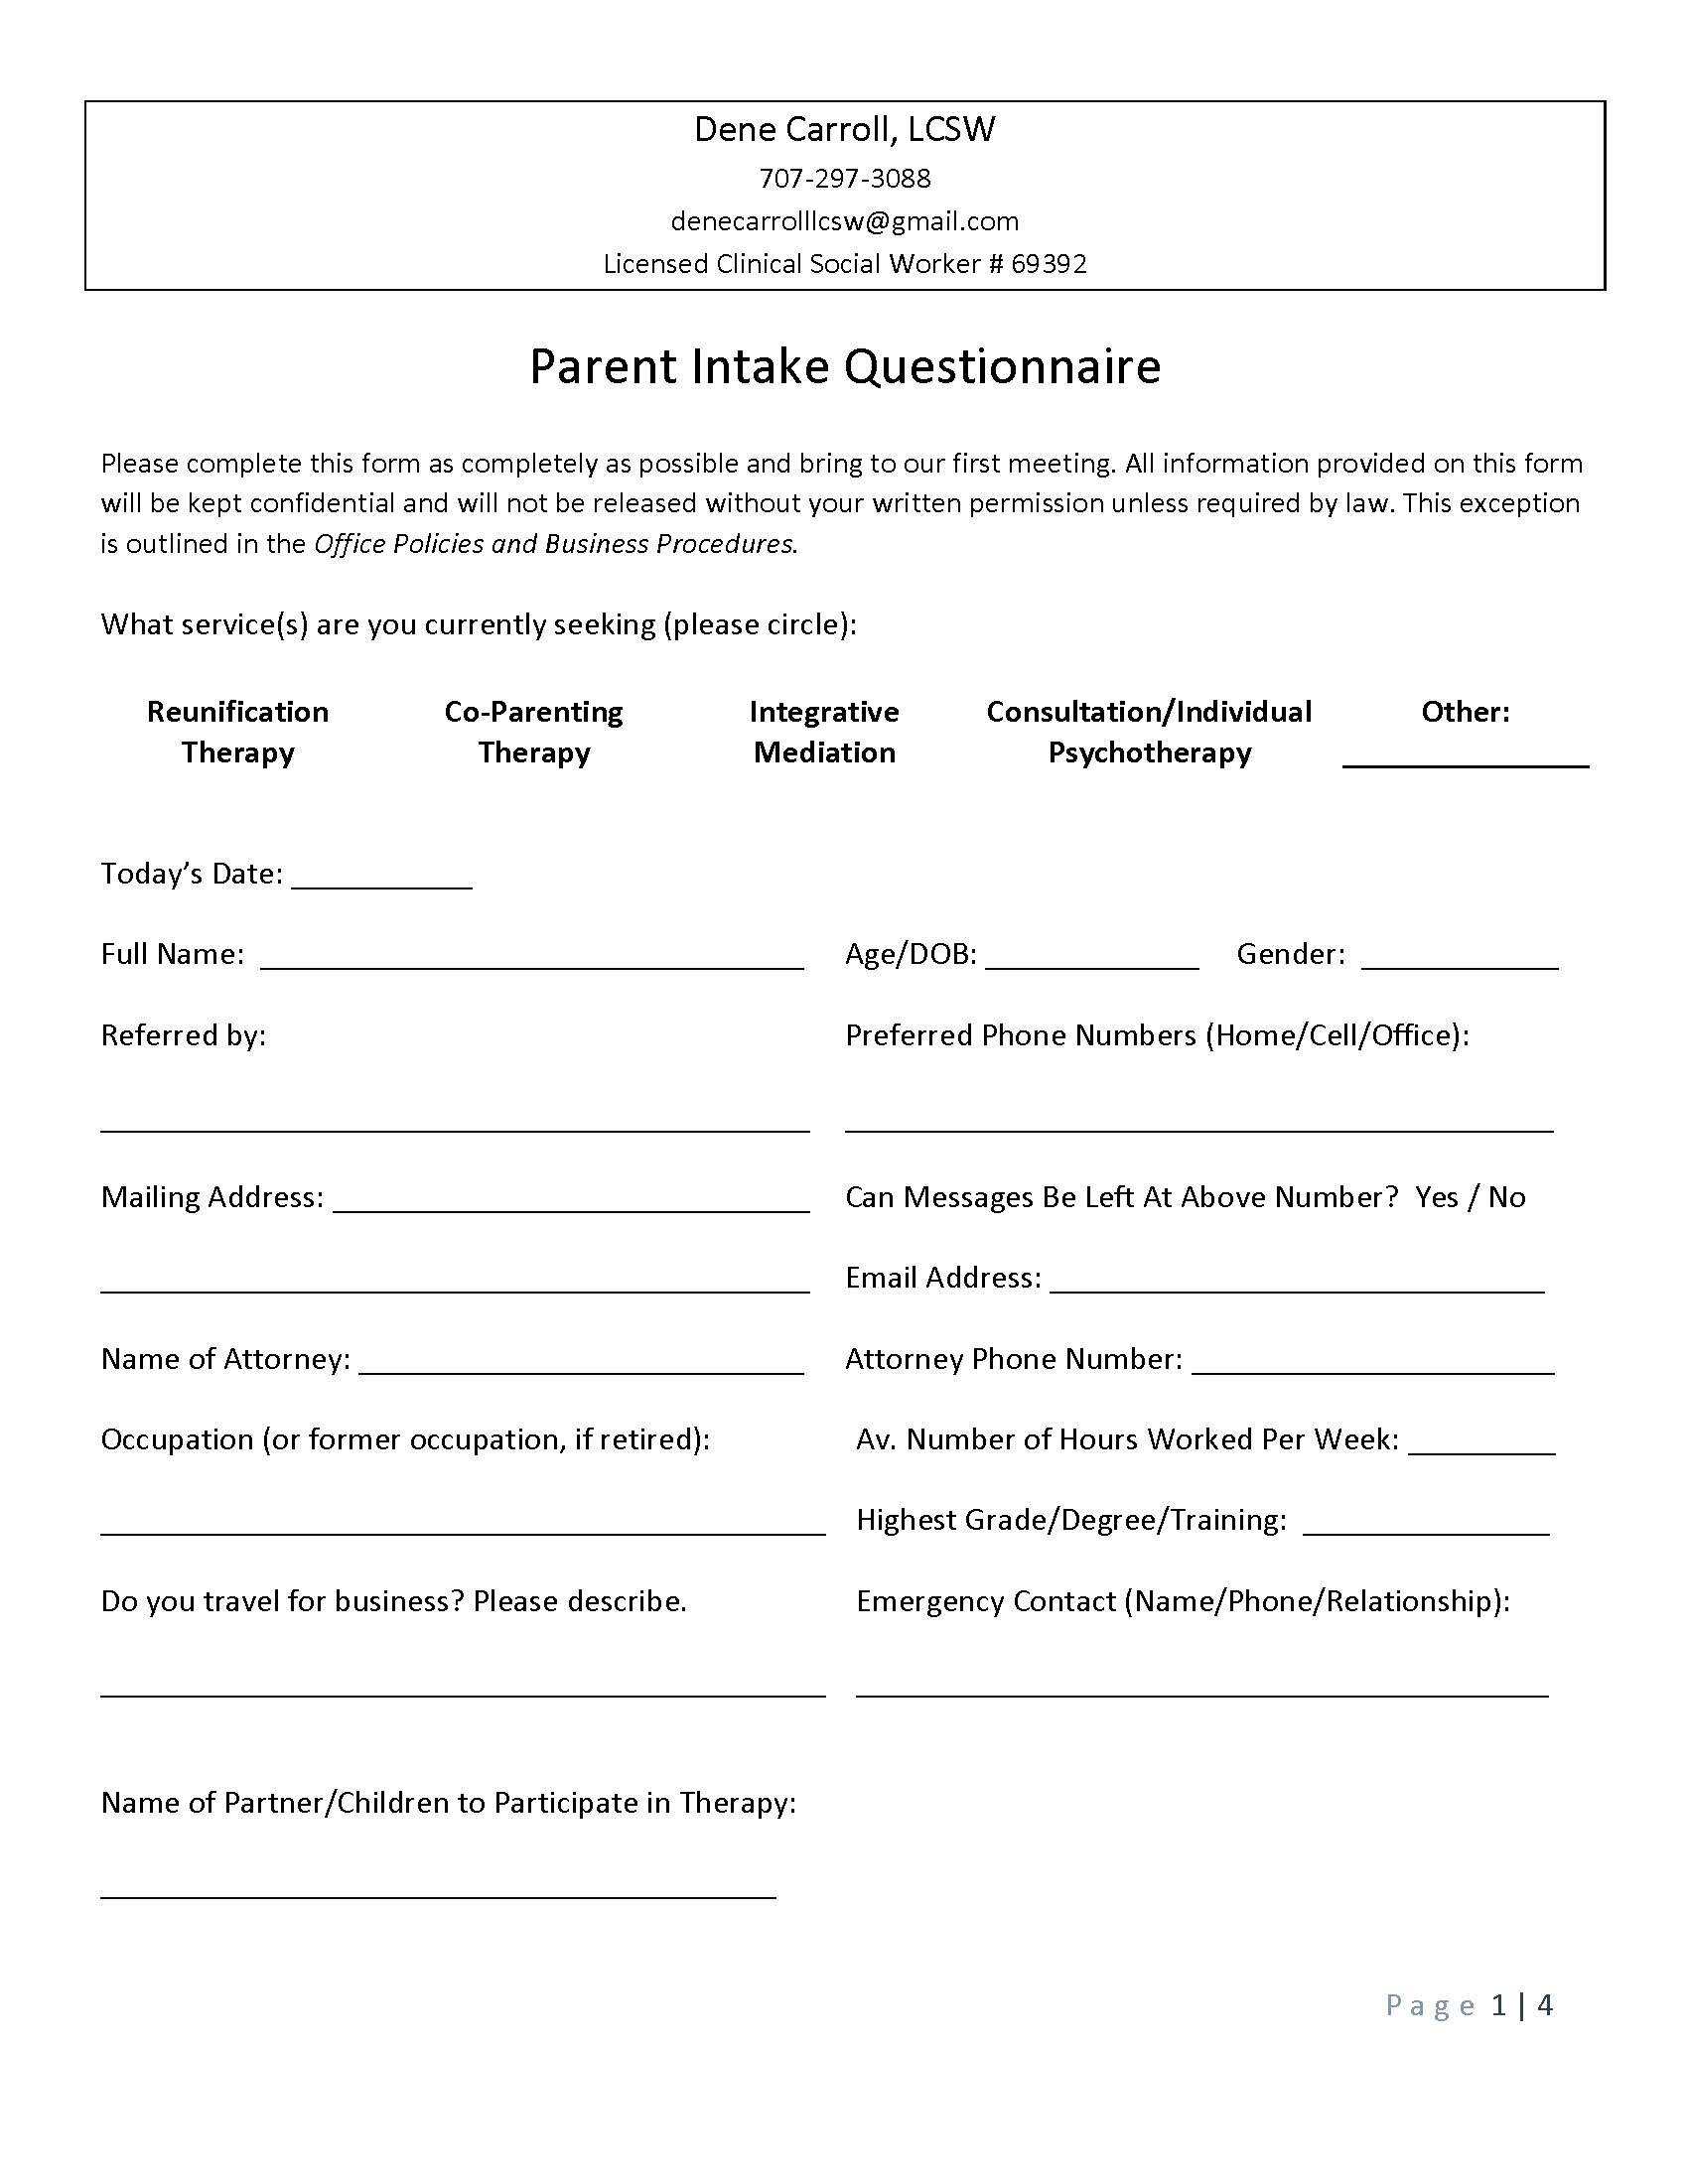 Pages from Parent+Intake+Questionnaire.jpg